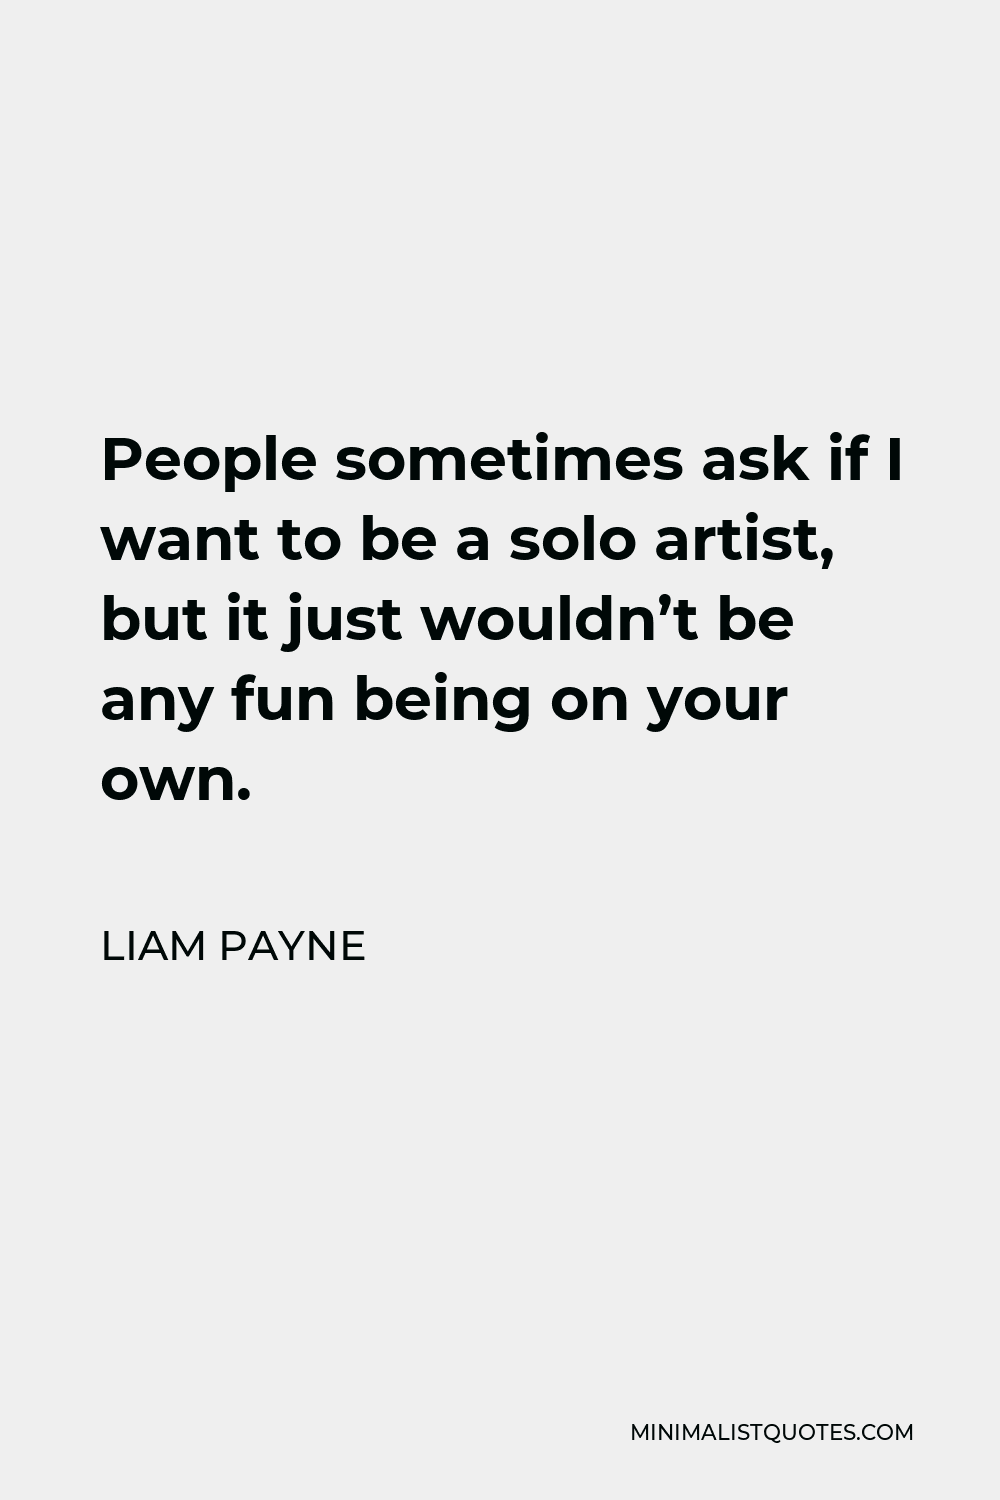 Liam Payne Quote - People sometimes ask if I want to be a solo artist, but it just wouldn’t be any fun being on your own.